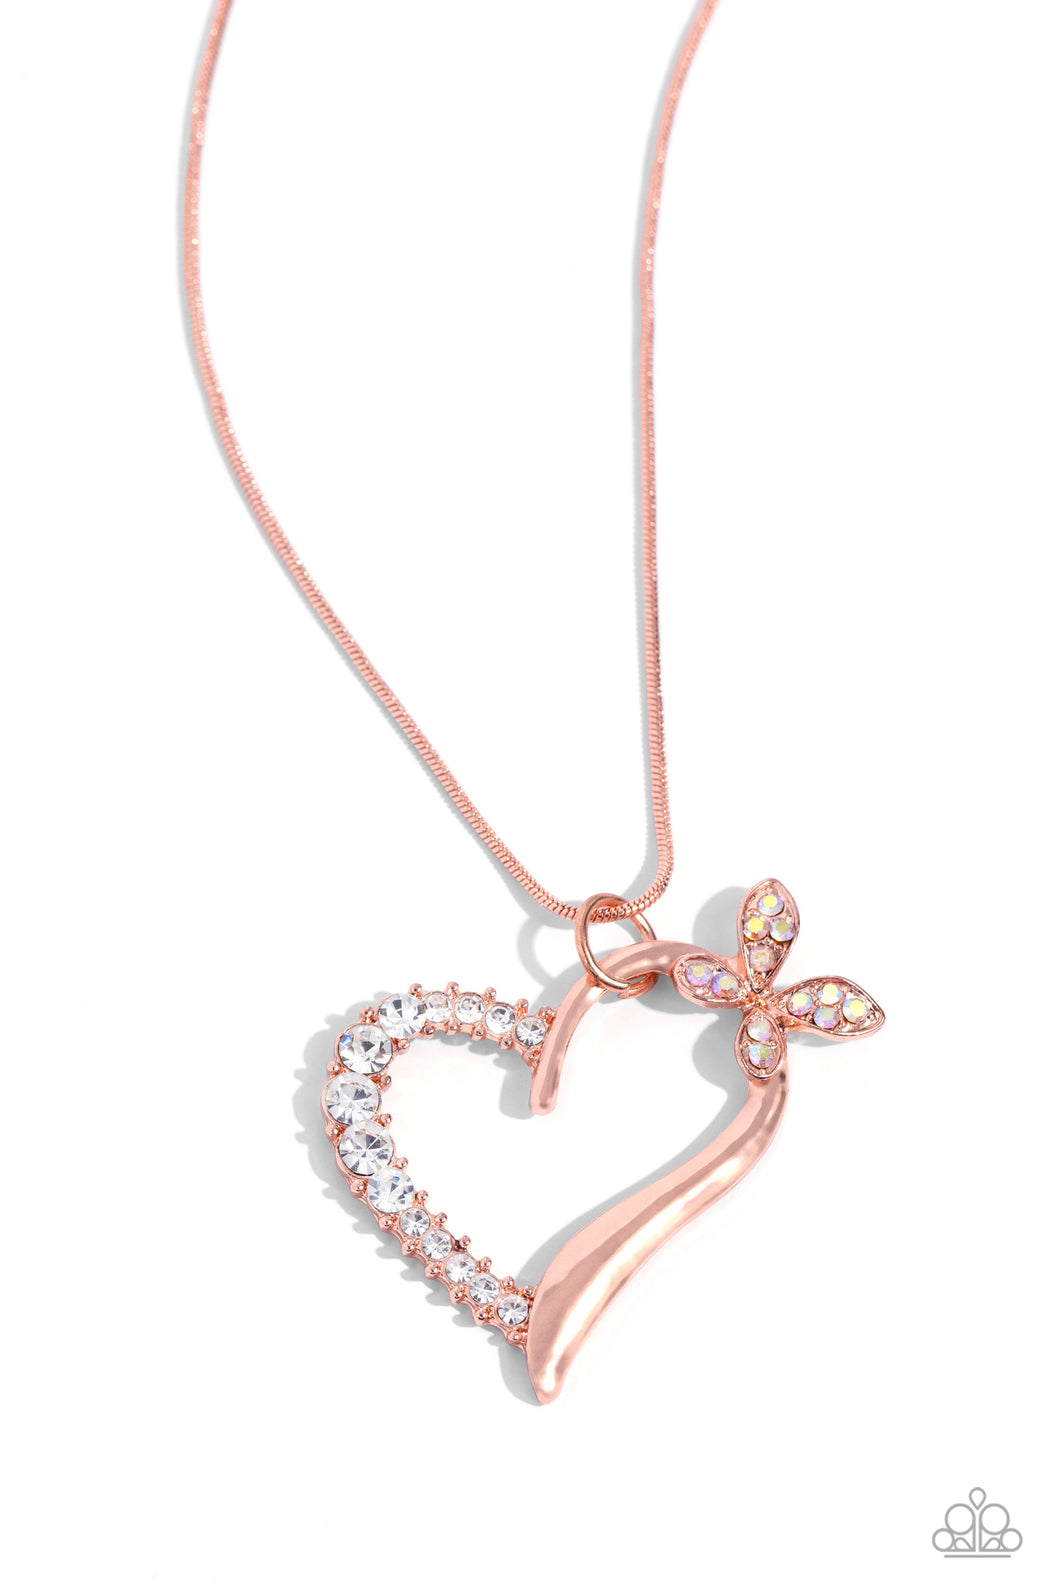 Half-Hearted Haven - Copper (Heart) Necklace